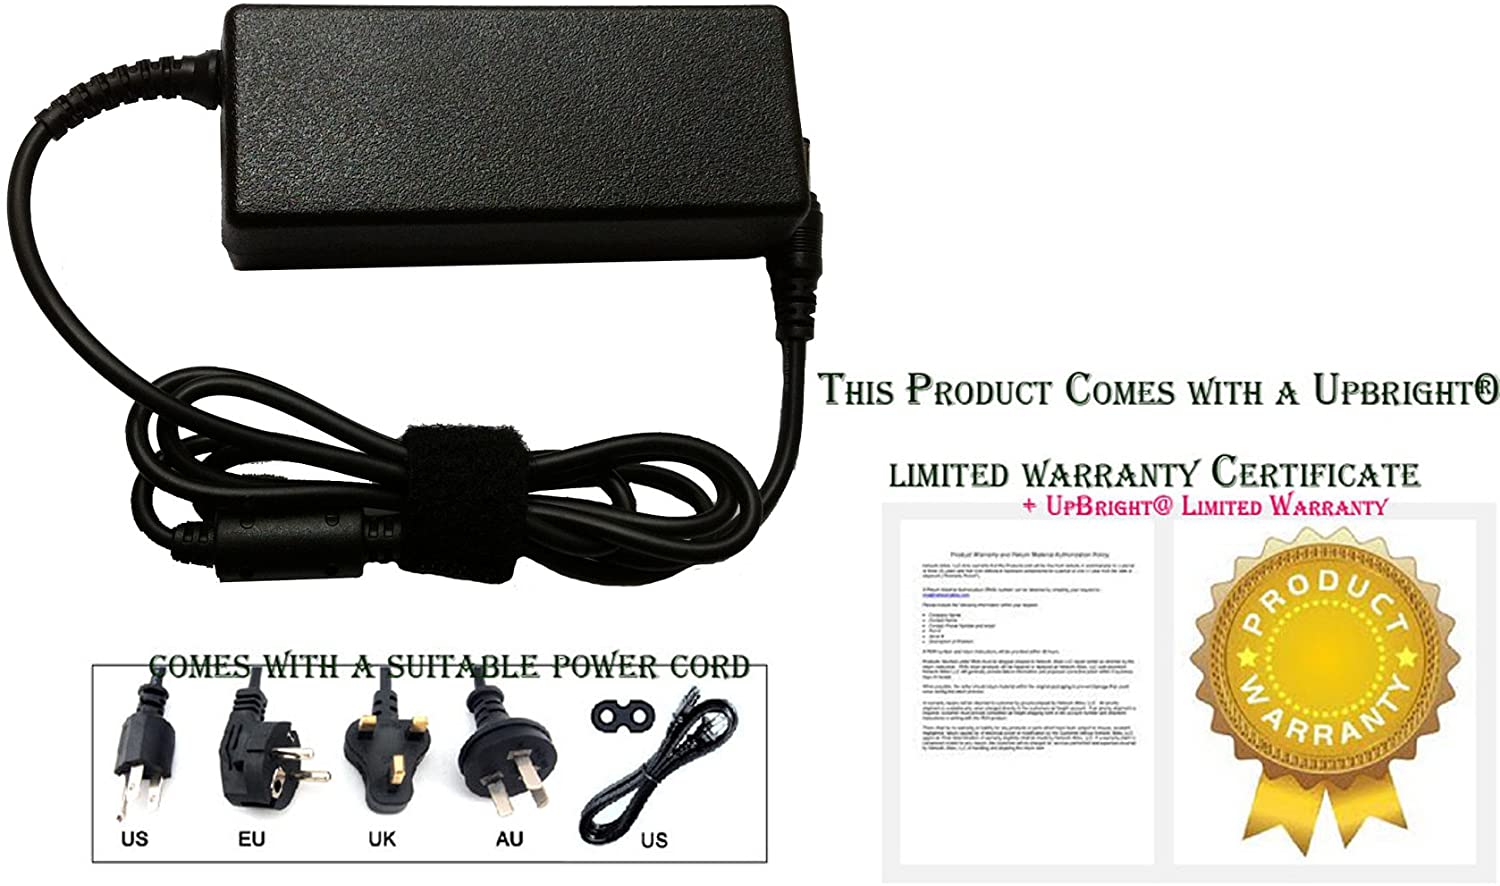 UPBRIGHT New AC/DC Adapter for Delta Electronics INC DPS-60PB Series DPS-60PB A DPS-60PB C Power Supply Cord Cable PS Charger Input: 100-240 VAC Worldwide Use Mains PSU